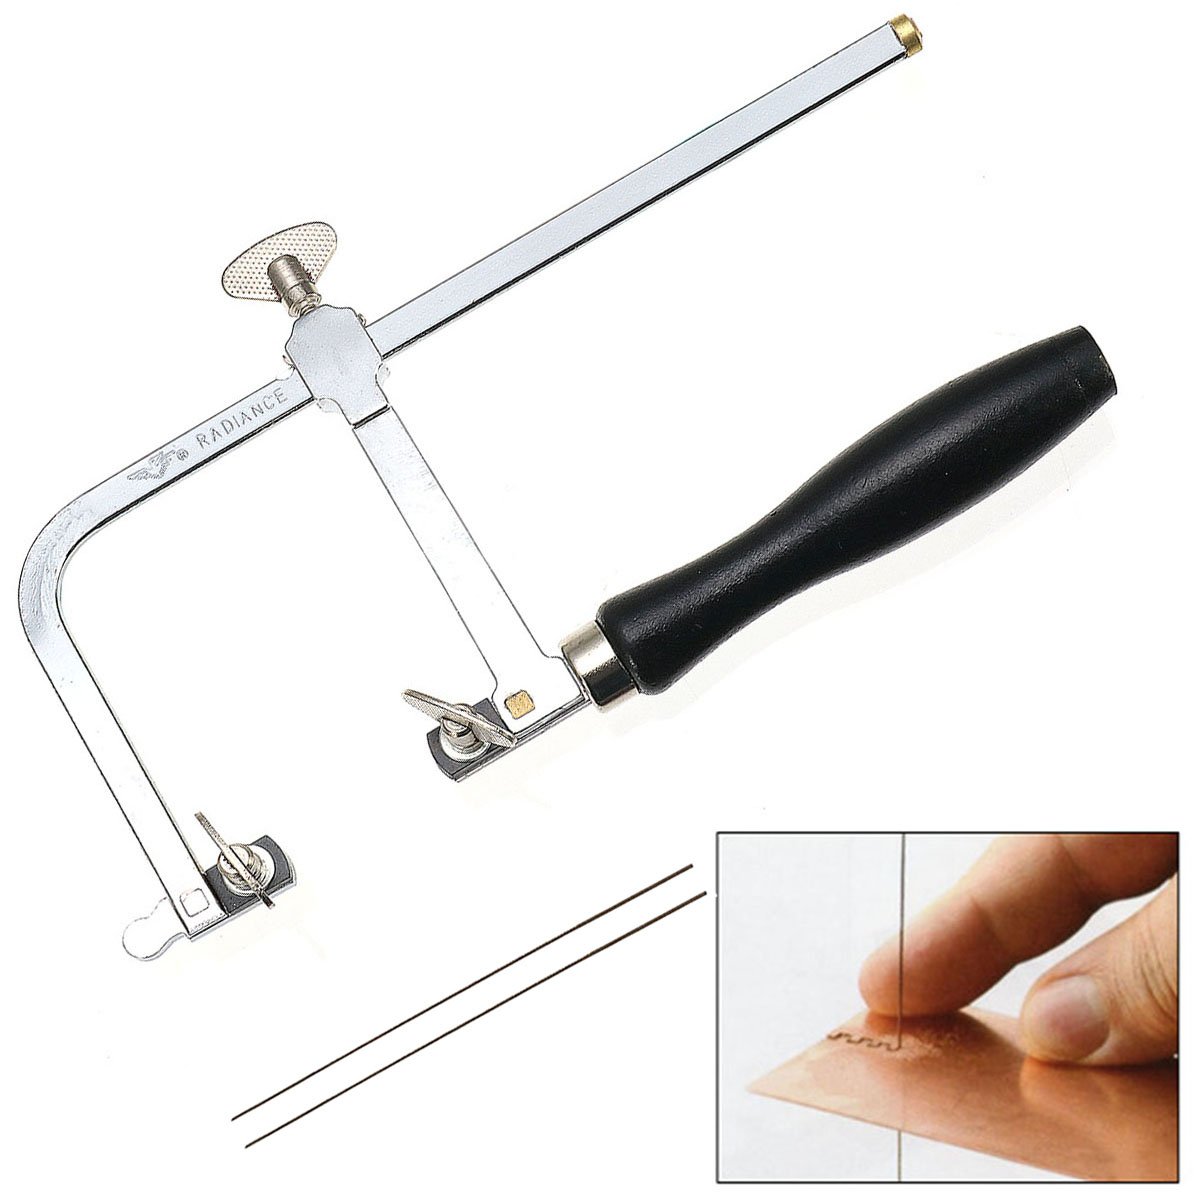 Mini-Adjustable-Wood-Working-Saw-Bow-U-shaped-Craft-Wire-Carved-Hand-Tool-1179037